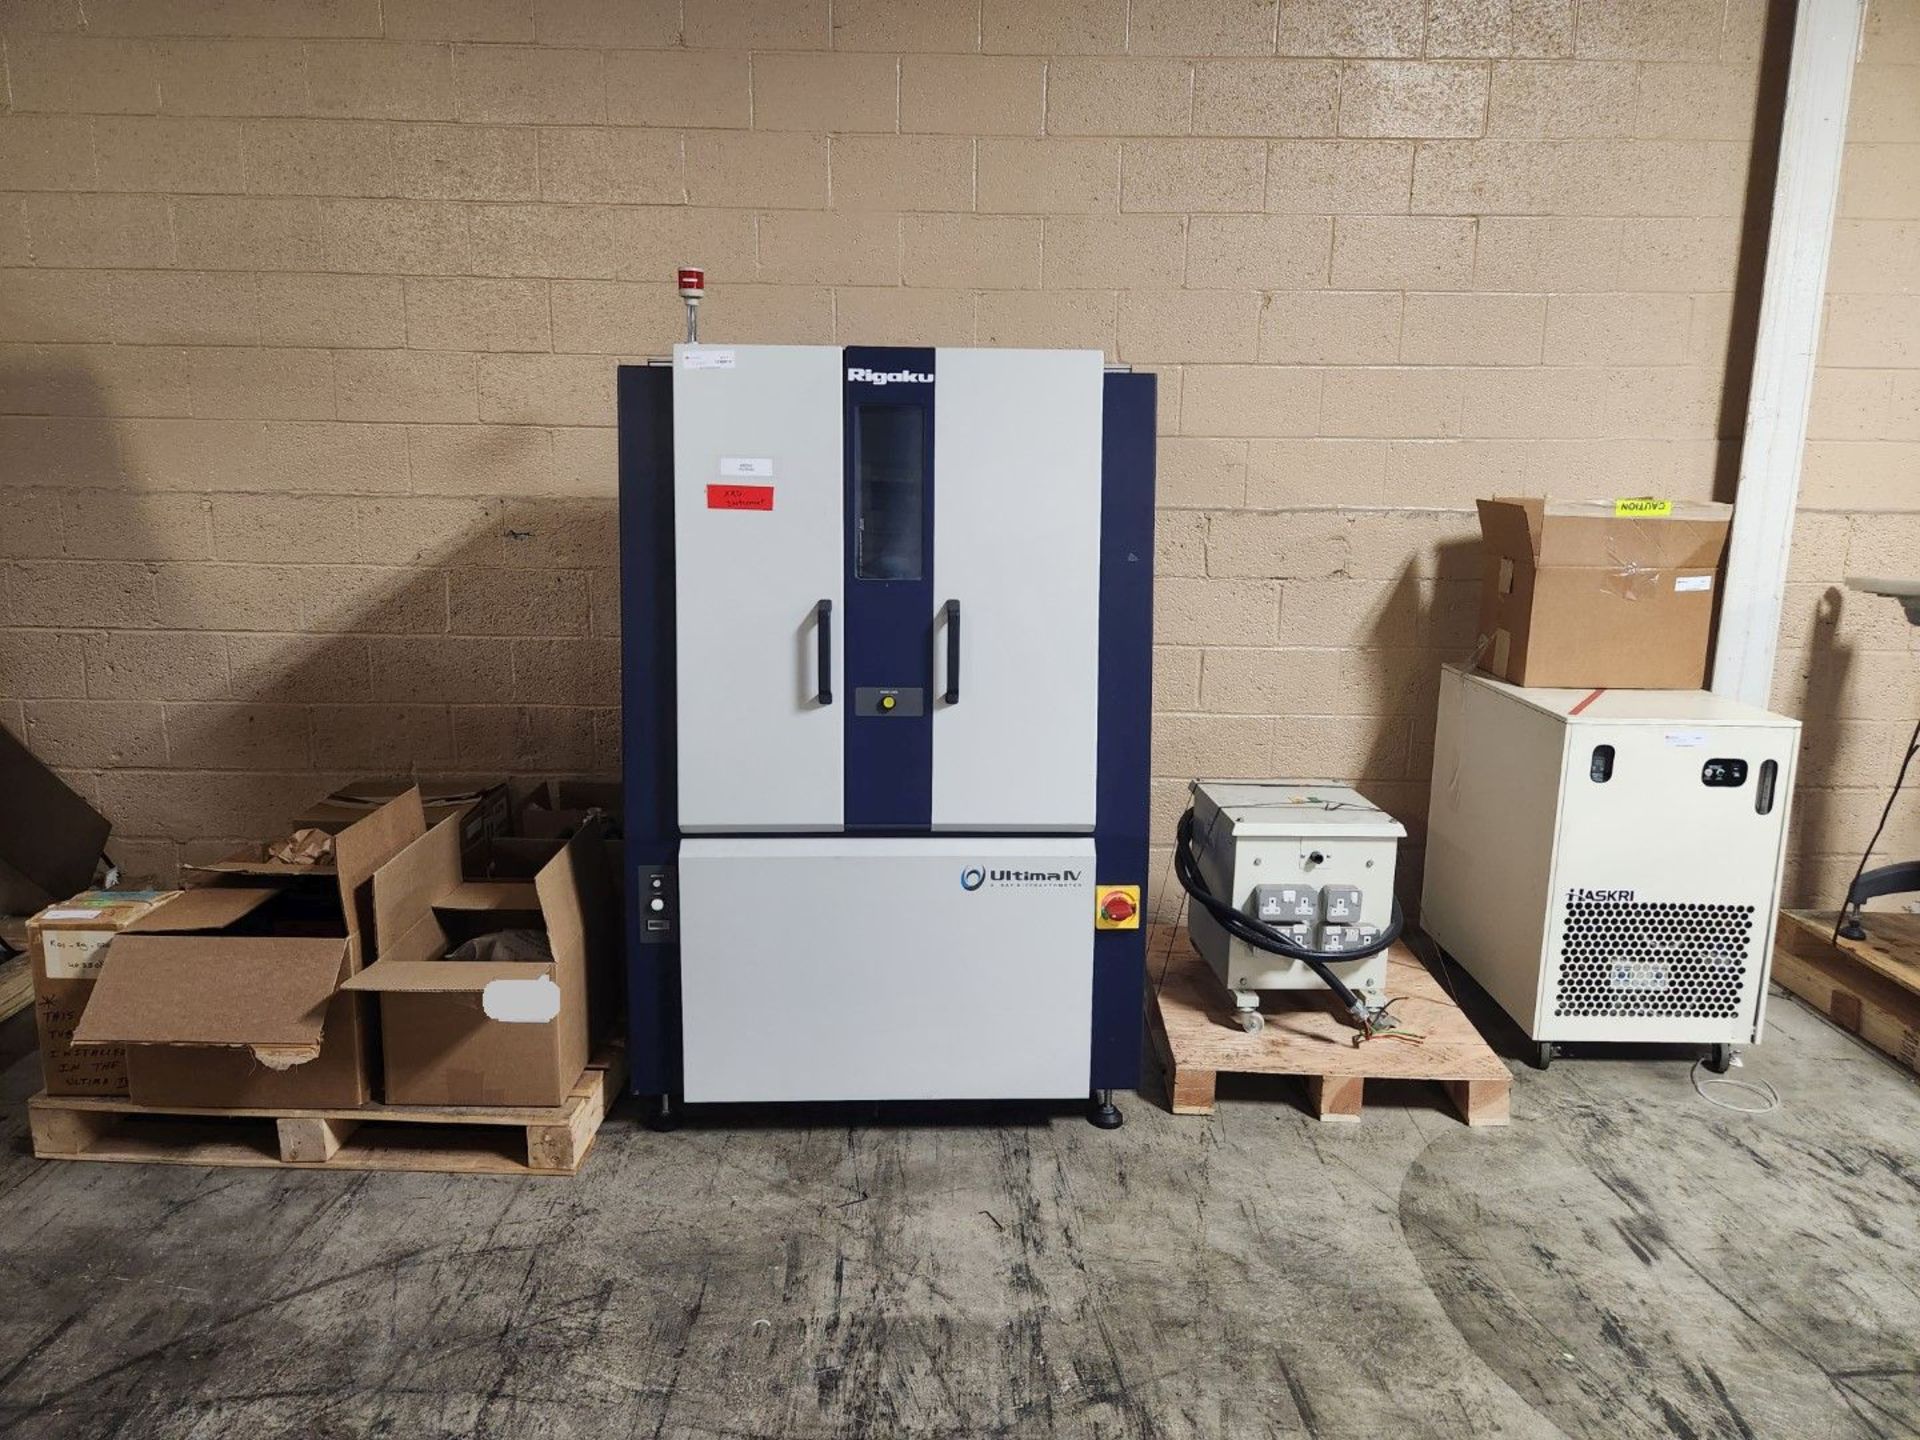 Rigaku Ultima IV X-Ray diffractometer, model PTC-30 kw, SCR programmable temperature controller,